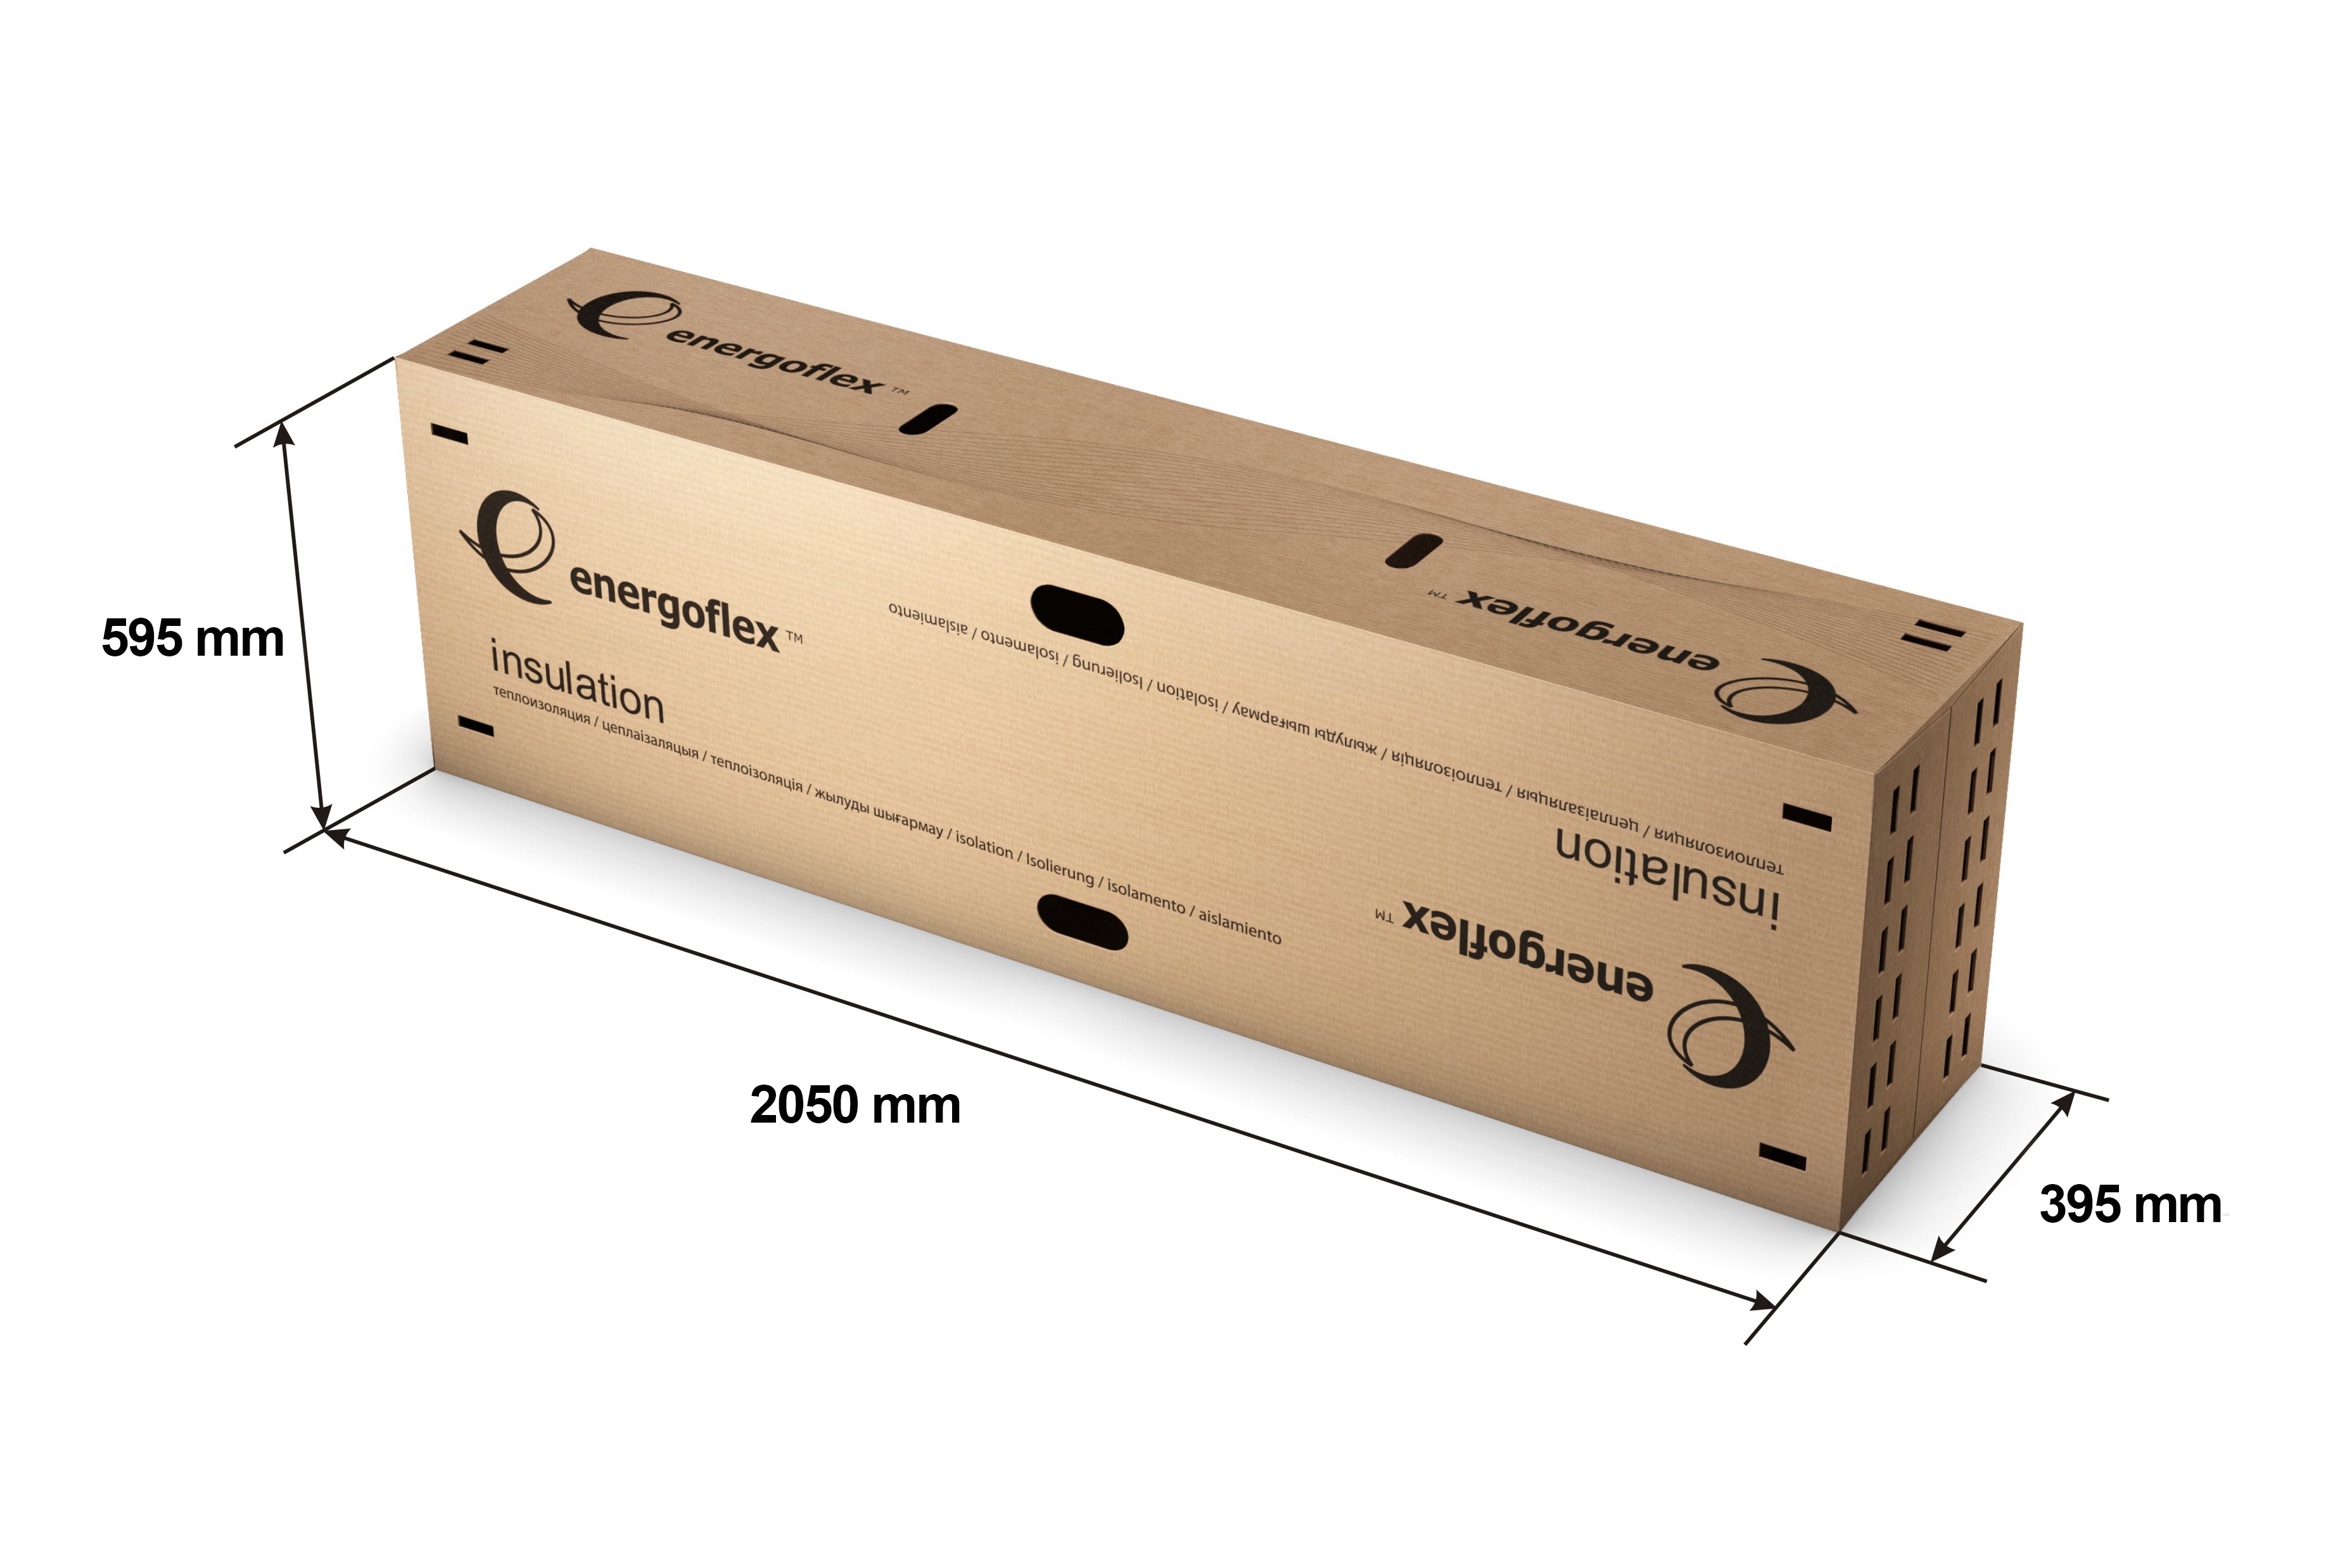 Change in packaging characteristics